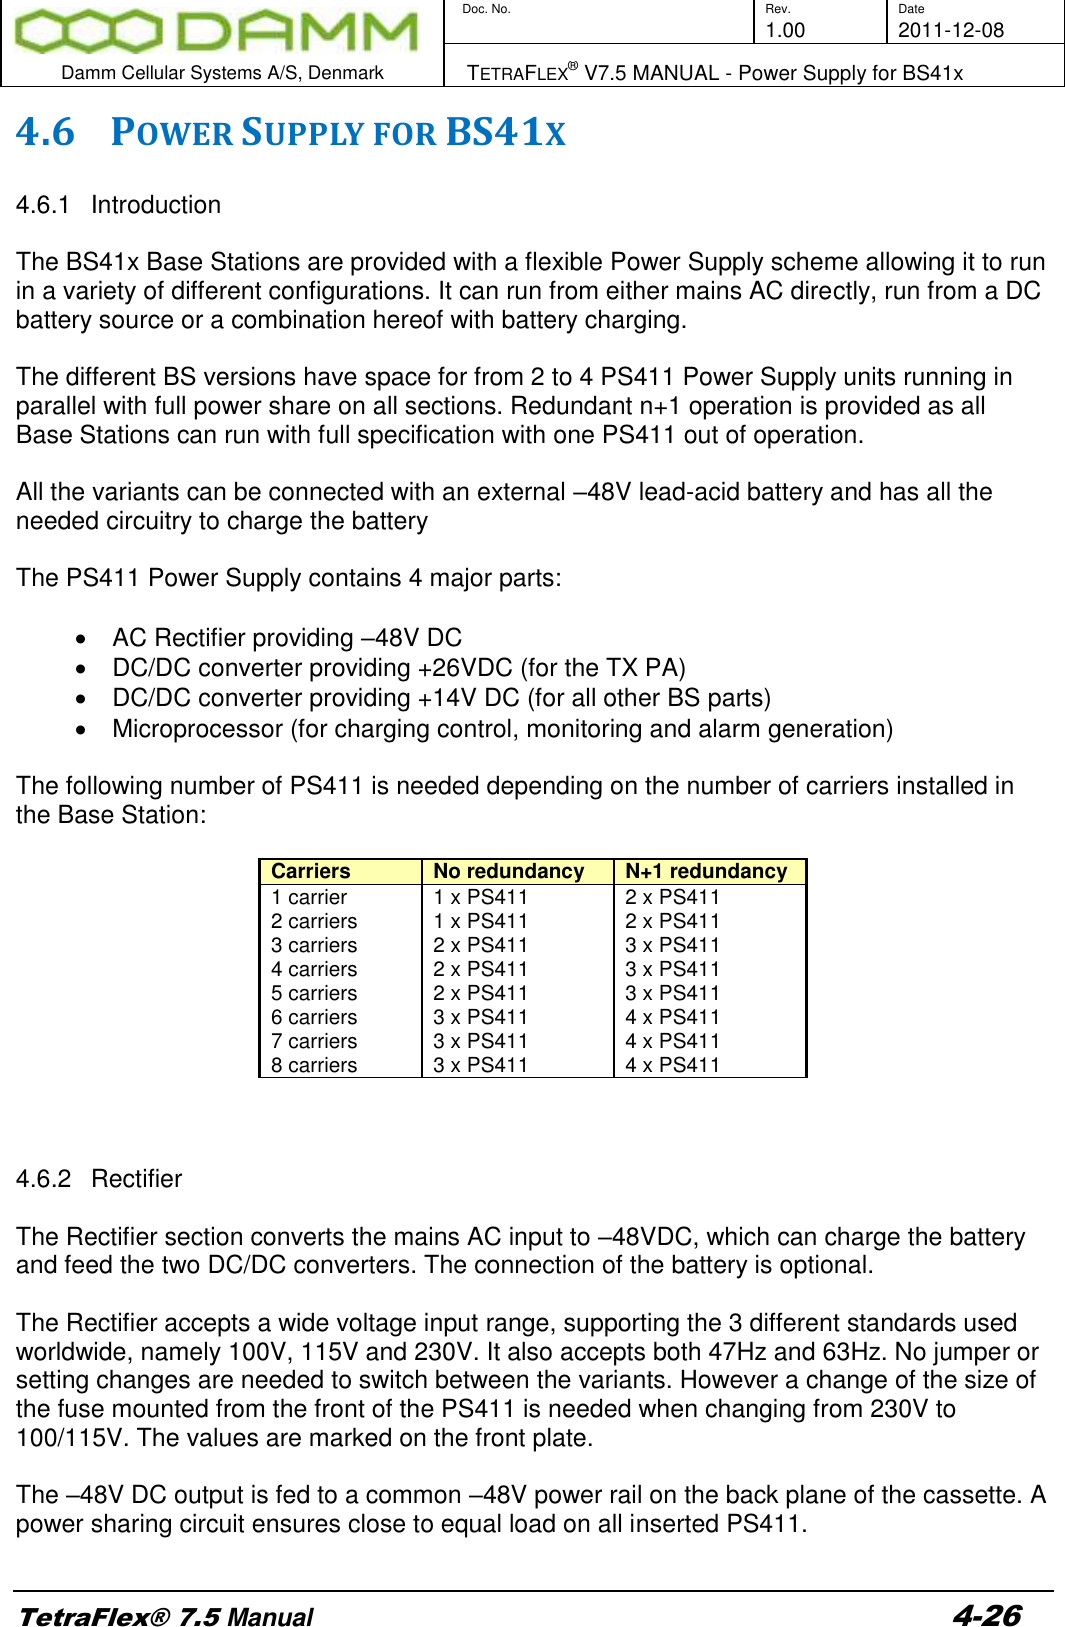        Doc. No. Rev. Date     1.00 2011-12-08  Damm Cellular Systems A/S, Denmark   TETRAFLEX® V7.5 MANUAL - Power Supply for BS41x  TetraFlex® 7.5 Manual 4-26 4.6 POWER SUPPLY FOR BS41X  4.6.1  Introduction  The BS41x Base Stations are provided with a flexible Power Supply scheme allowing it to run in a variety of different configurations. It can run from either mains AC directly, run from a DC battery source or a combination hereof with battery charging.  The different BS versions have space for from 2 to 4 PS411 Power Supply units running in parallel with full power share on all sections. Redundant n+1 operation is provided as all Base Stations can run with full specification with one PS411 out of operation.  All the variants can be connected with an external –48V lead-acid battery and has all the needed circuitry to charge the battery  The PS411 Power Supply contains 4 major parts:    AC Rectifier providing –48V DC   DC/DC converter providing +26VDC (for the TX PA)   DC/DC converter providing +14V DC (for all other BS parts)   Microprocessor (for charging control, monitoring and alarm generation)   The following number of PS411 is needed depending on the number of carriers installed in the Base Station:  Carriers No redundancy N+1 redundancy 1 carrier 1 x PS411 2 x PS411 2 carriers 1 x PS411 2 x PS411 3 carriers 2 x PS411 3 x PS411 4 carriers 2 x PS411 3 x PS411 5 carriers 2 x PS411 3 x PS411 6 carriers 3 x PS411 4 x PS411 7 carriers 3 x PS411 4 x PS411 8 carriers 3 x PS411 4 x PS411    4.6.2  Rectifier  The Rectifier section converts the mains AC input to –48VDC, which can charge the battery and feed the two DC/DC converters. The connection of the battery is optional.  The Rectifier accepts a wide voltage input range, supporting the 3 different standards used worldwide, namely 100V, 115V and 230V. It also accepts both 47Hz and 63Hz. No jumper or setting changes are needed to switch between the variants. However a change of the size of the fuse mounted from the front of the PS411 is needed when changing from 230V to 100/115V. The values are marked on the front plate.  The –48V DC output is fed to a common –48V power rail on the back plane of the cassette. A power sharing circuit ensures close to equal load on all inserted PS411.  